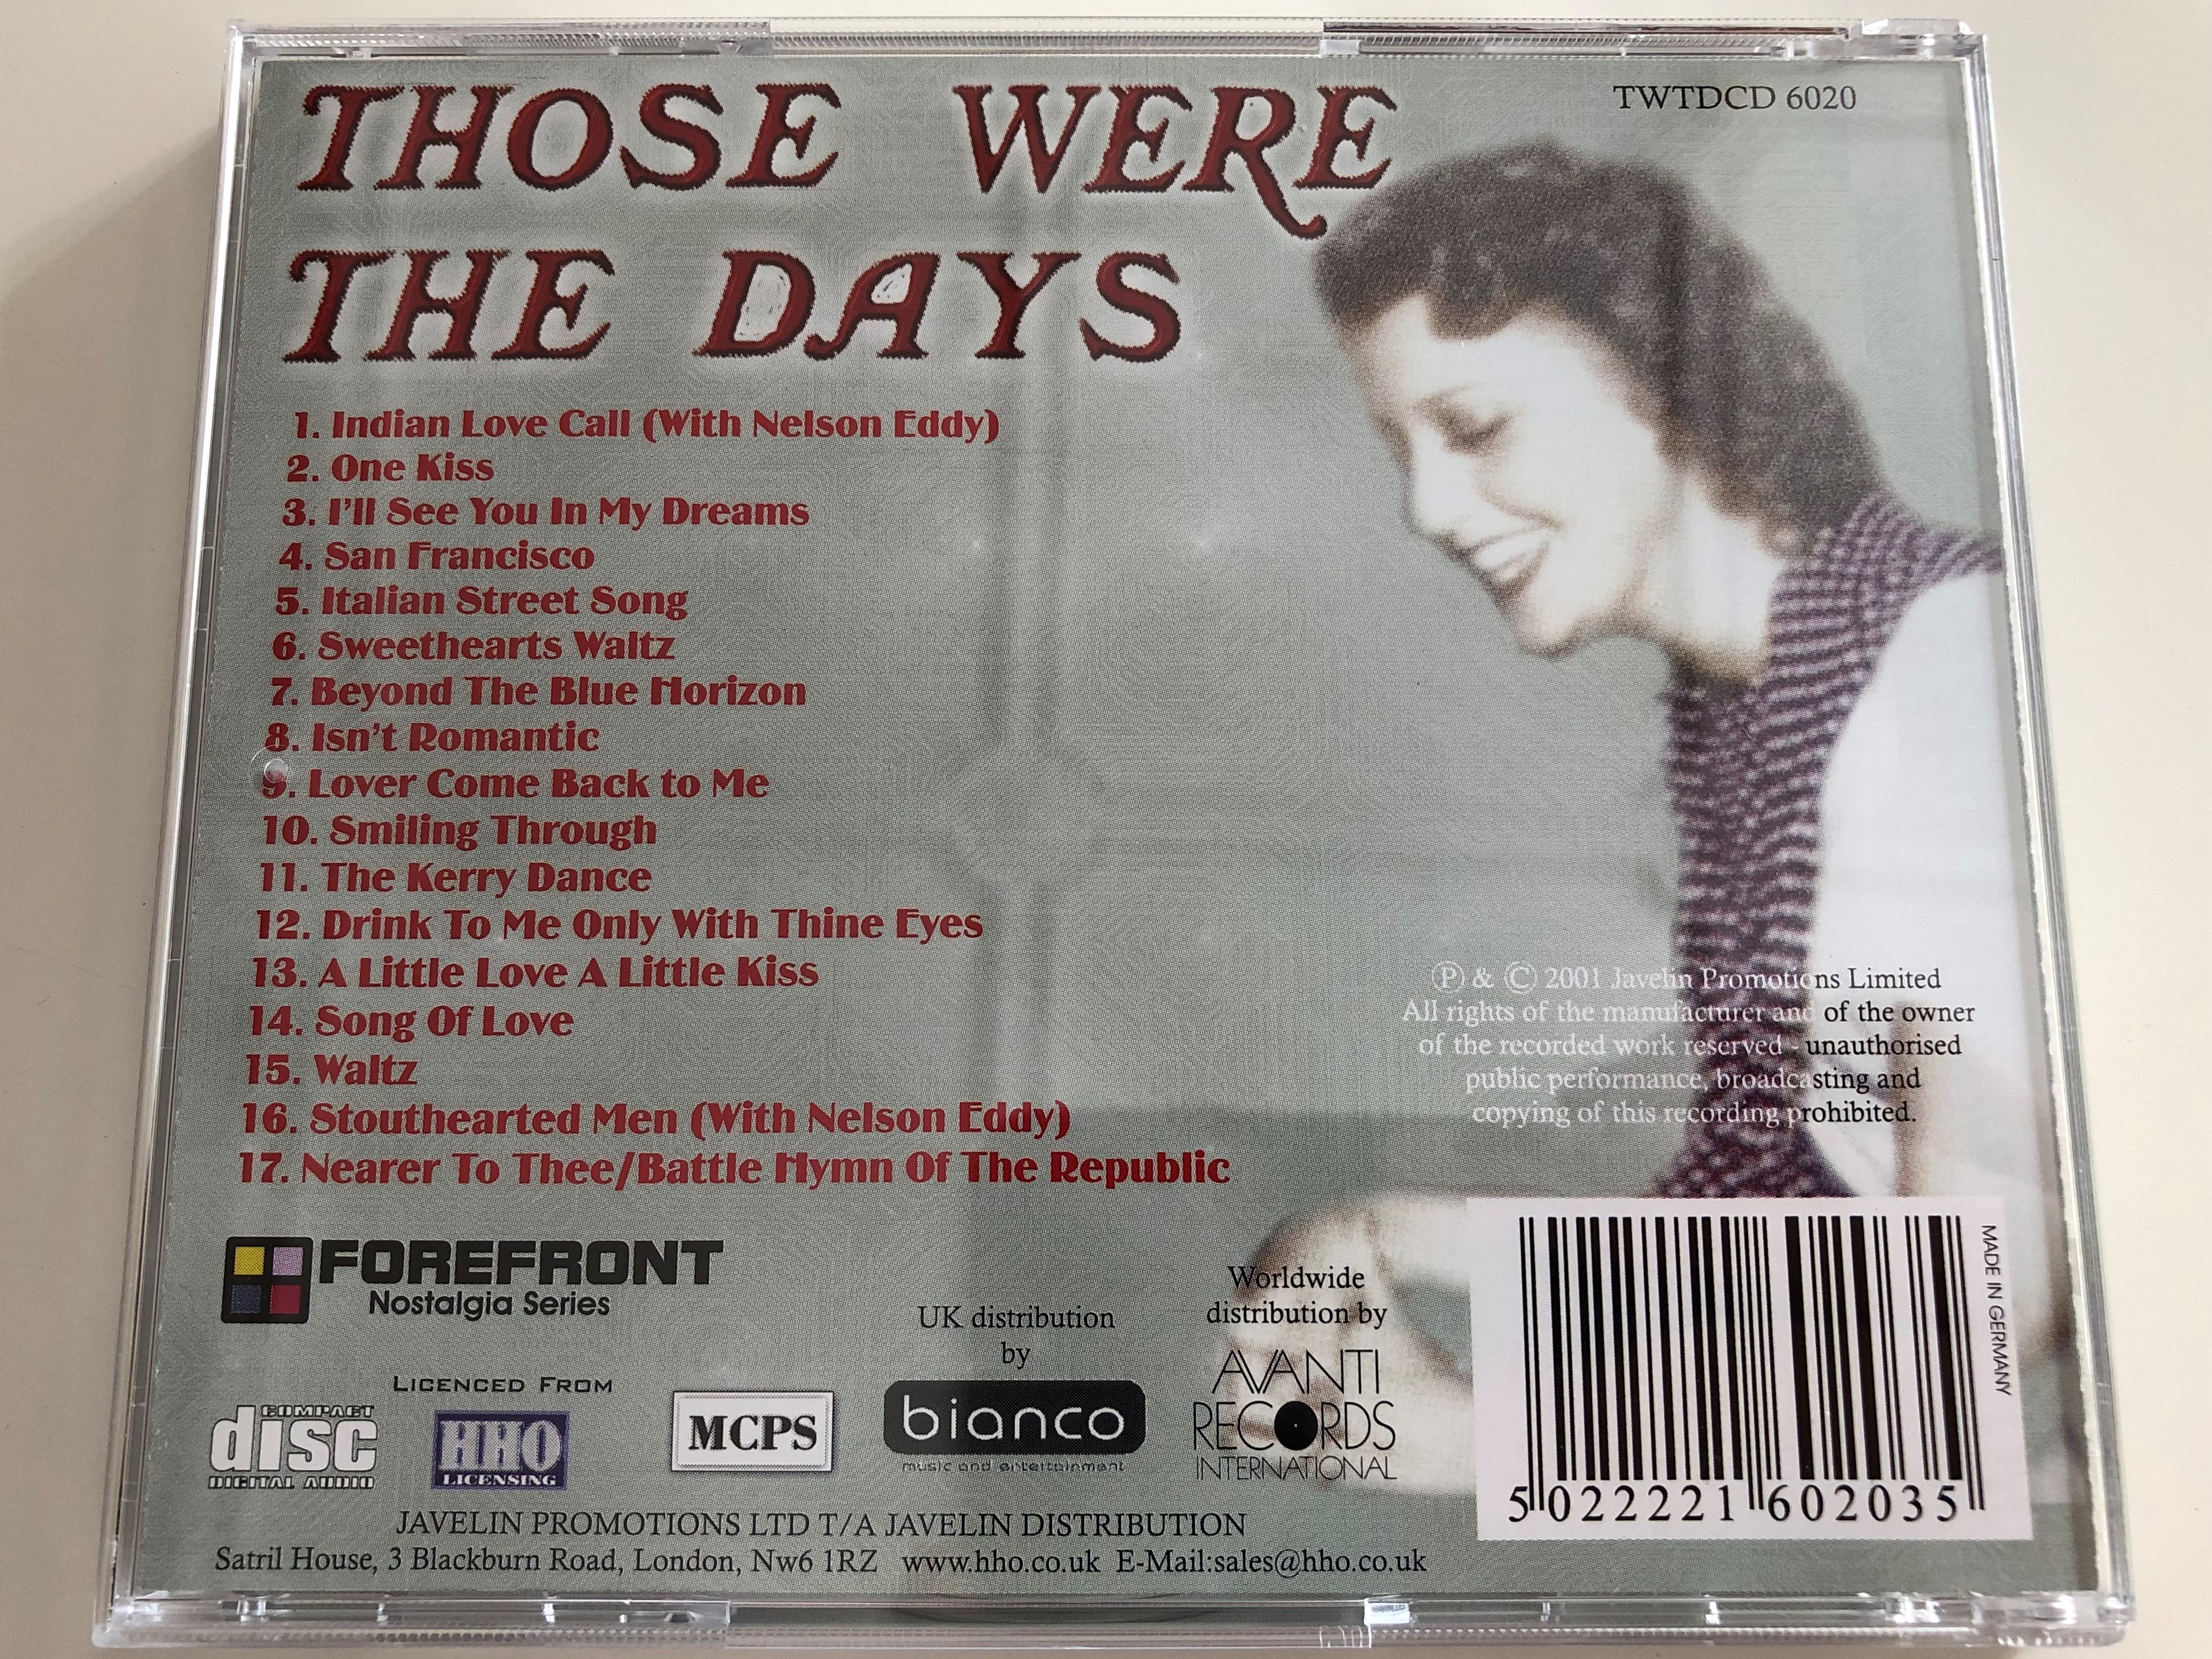 those-were-the-days-featuring-jeanette-macdonald-the-enchanting-sounds-of-a-golden-era-of-music-audio-cd-2001-forefront-nostalgia-series-5-.jpg